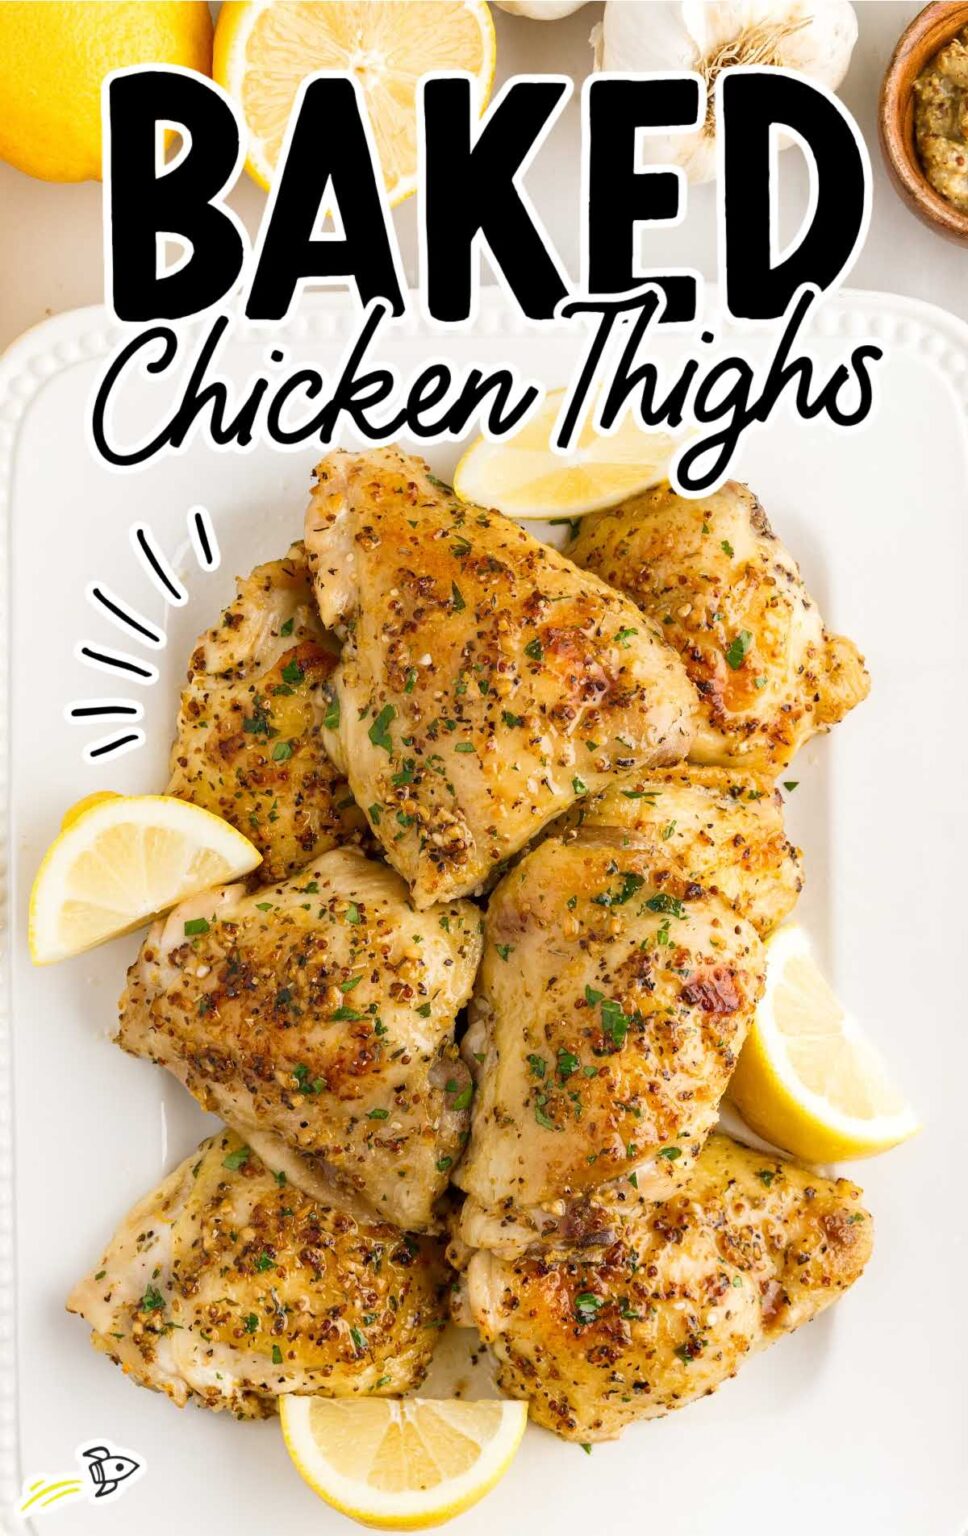 Baked Chicken Thighs - Spaceships and Laser Beams